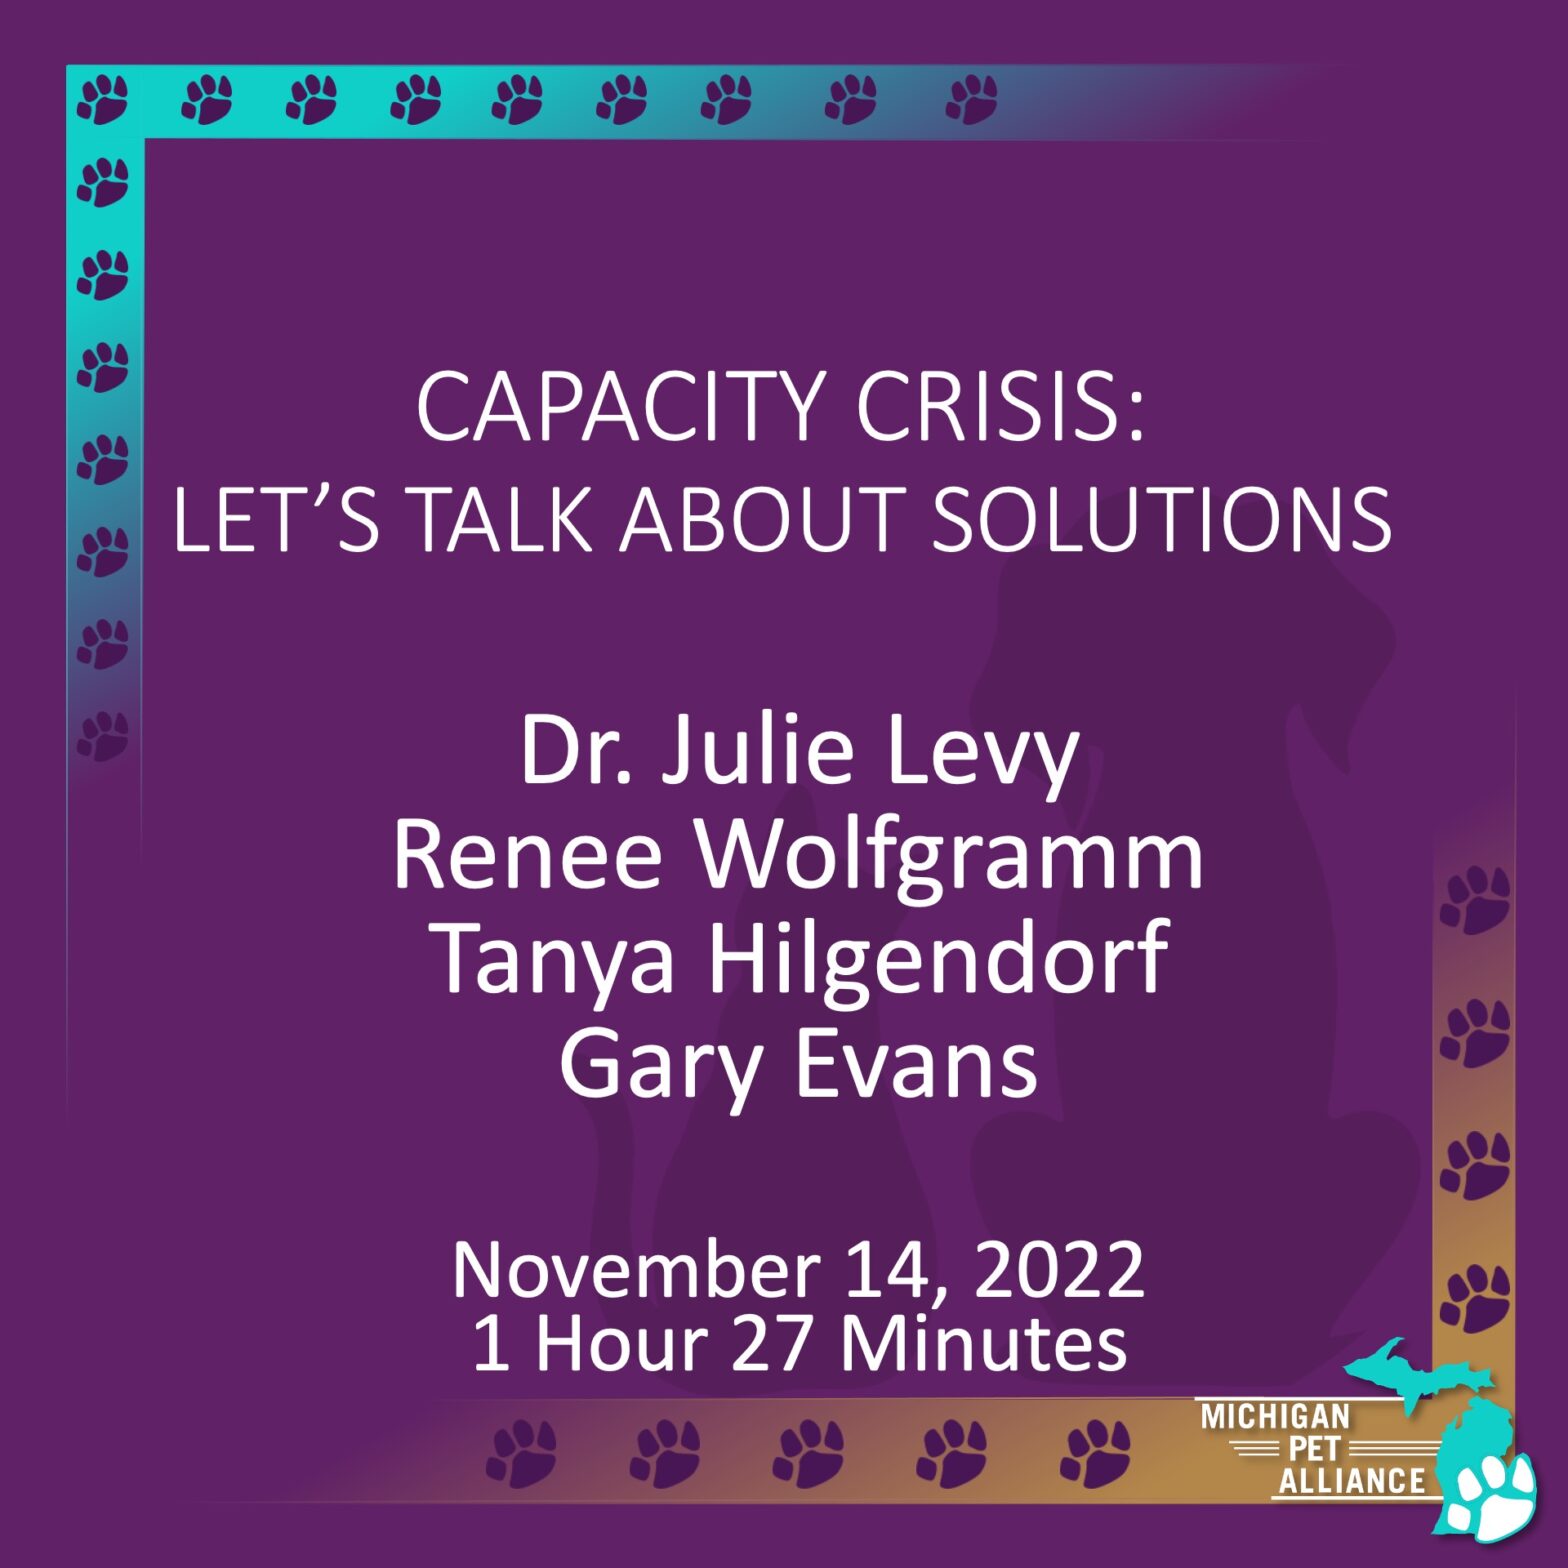 Capacity Crisis: Let’s Talk About Solutions